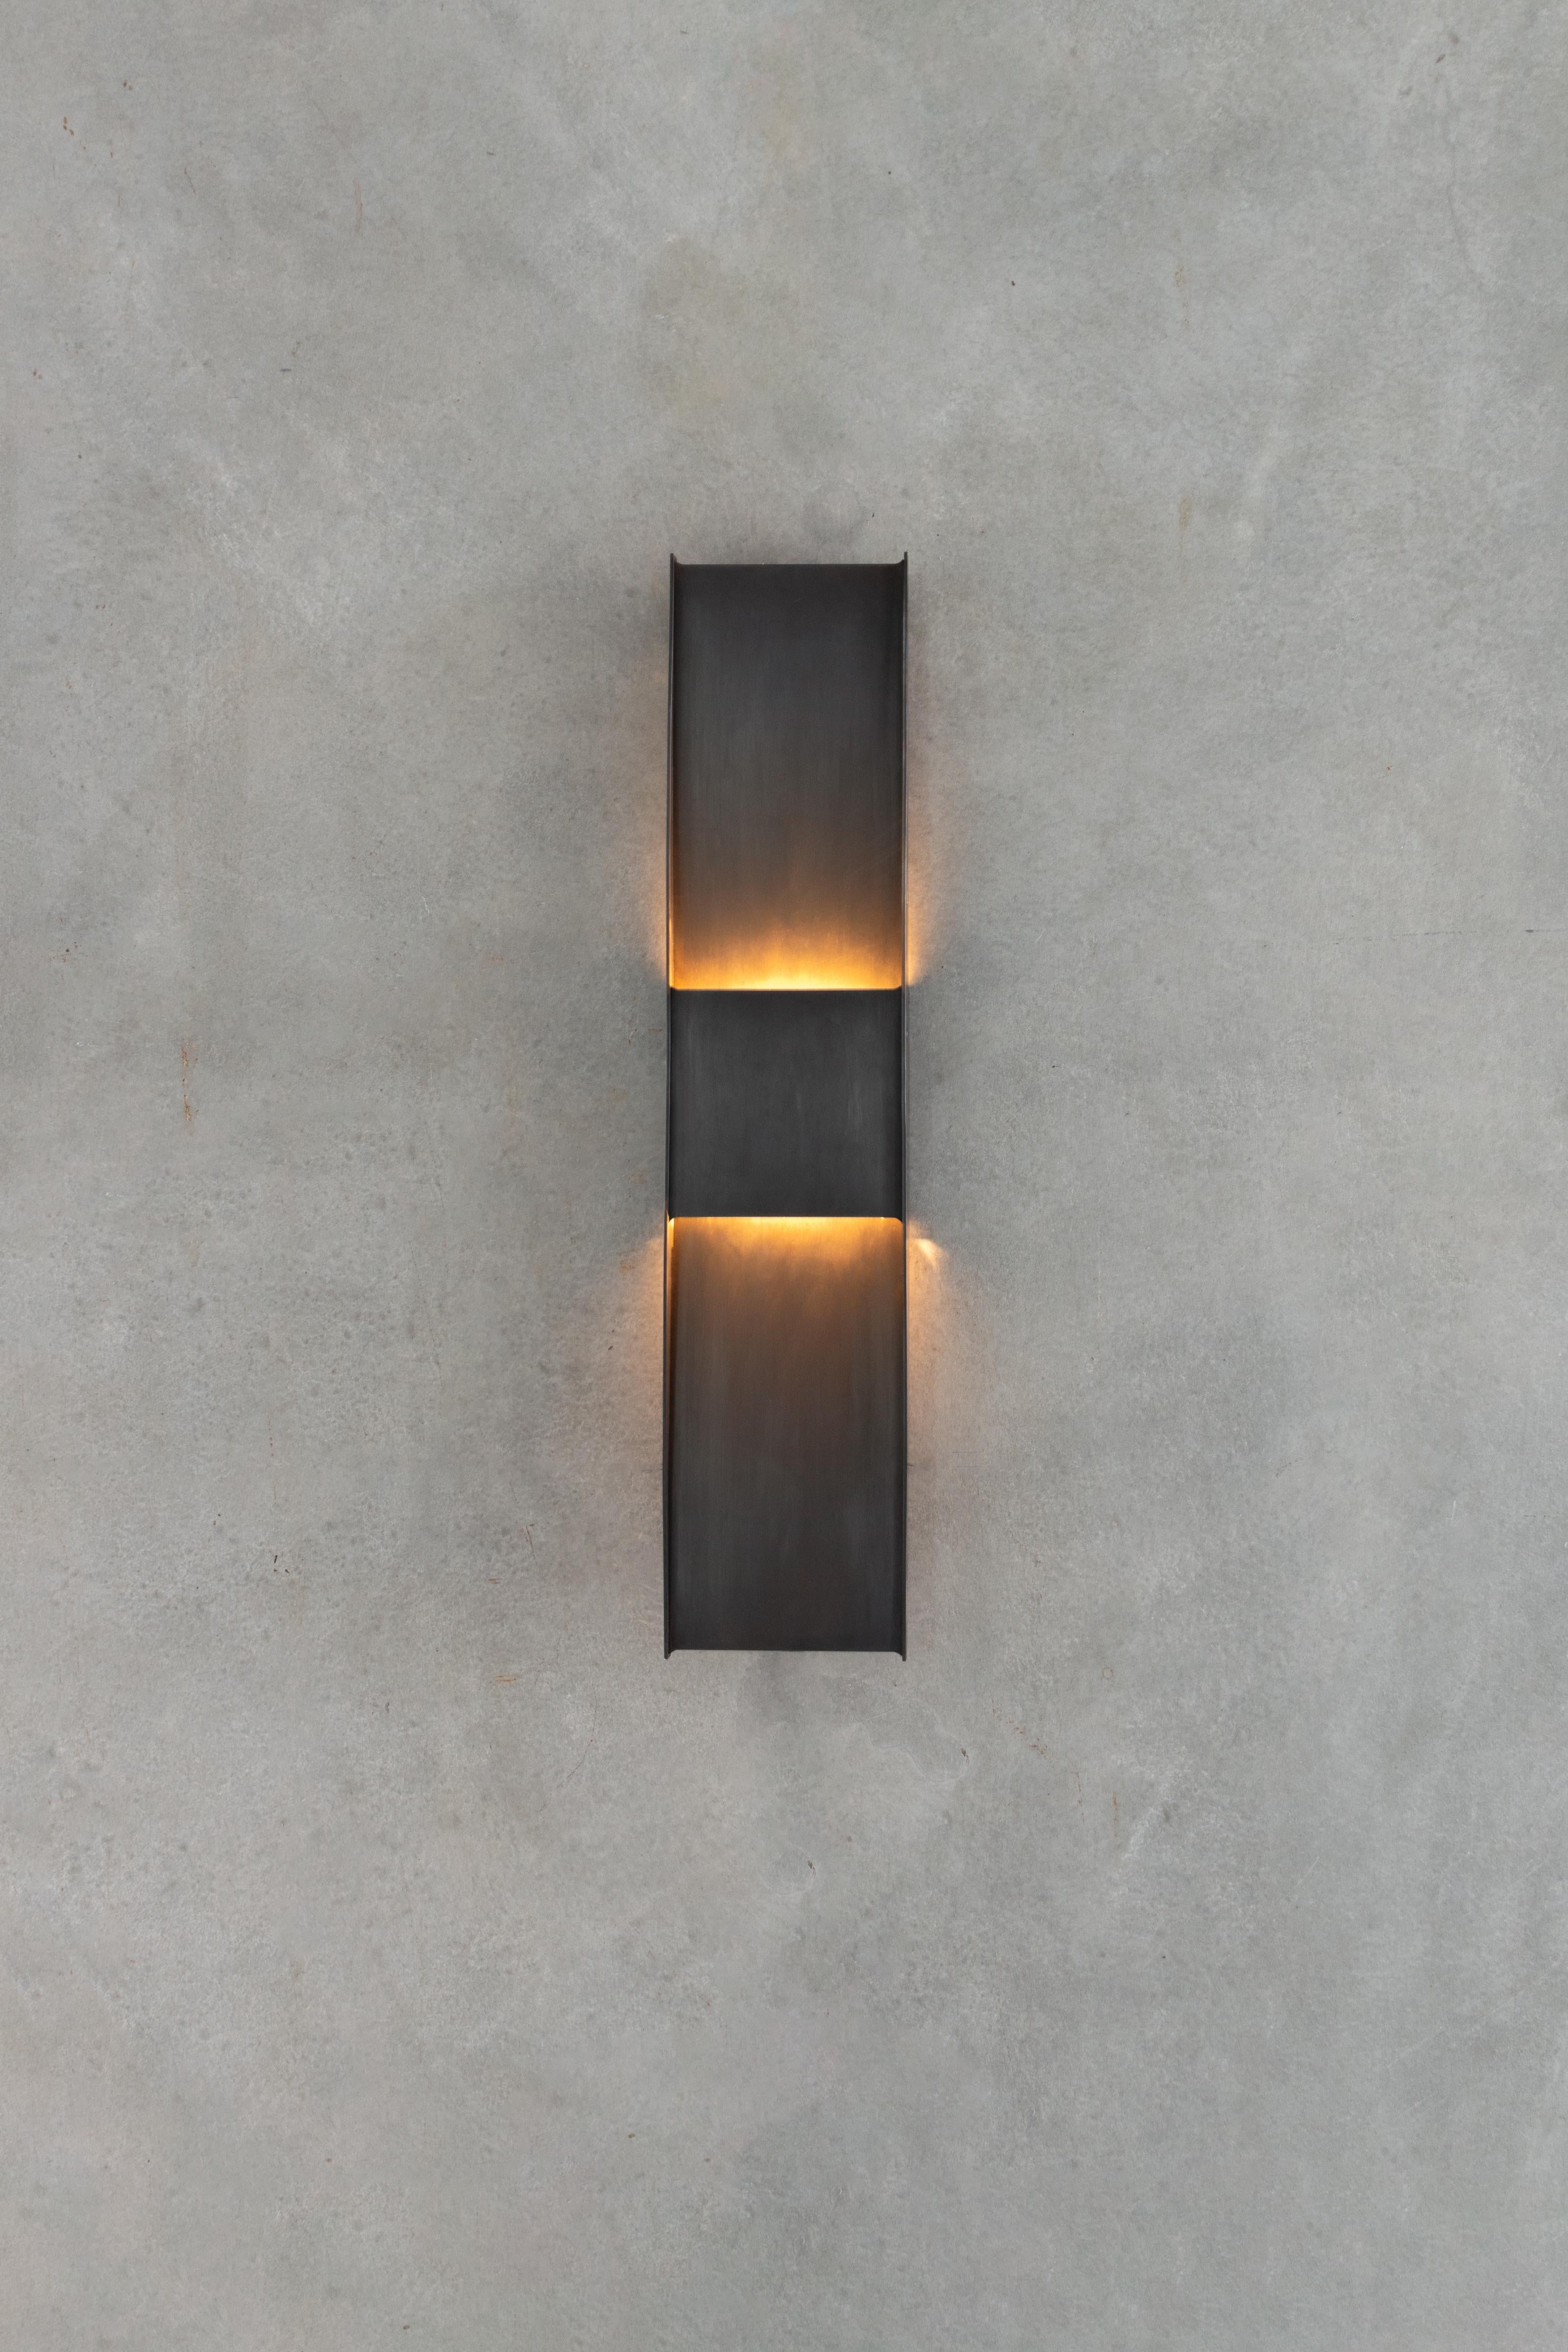 Contemporary Wall Lamp 'Vector'

Model shown: Black Steel

DIMENSIONS
H. 58 cm x W. 12.5 x D. 5cm / H. 22.75” x W. 5” x D. 2”

ELECTRICAL
Input Voltage: 110–120V, 220–240V, 110–277V  

Power Supply: Phase dimming, 0–10V, DALI

UL Listed